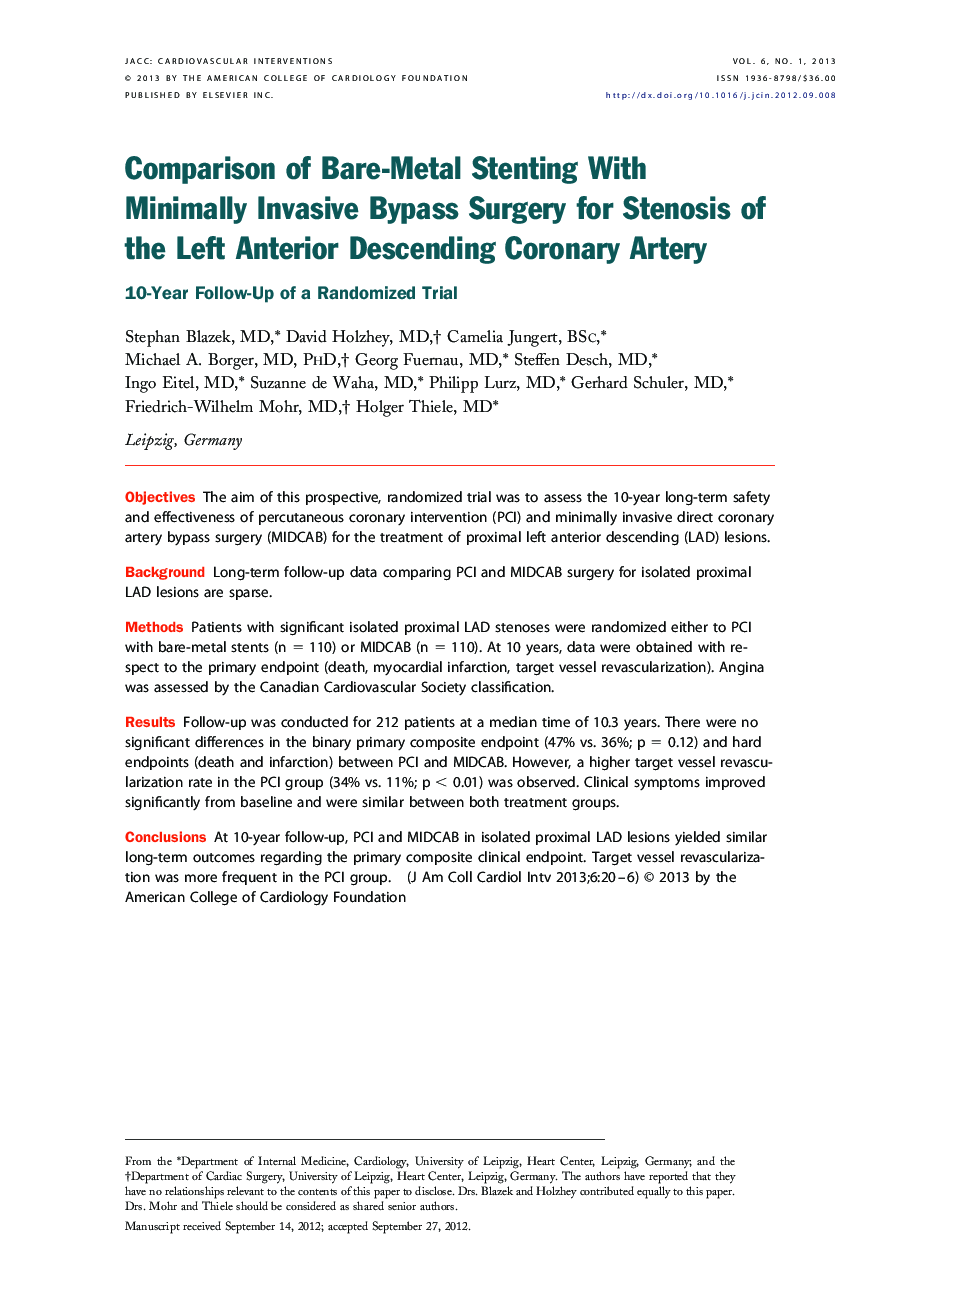 Comparison of Bare-Metal Stenting With Minimally Invasive Bypass Surgery for Stenosis of the Left Anterior Descending Coronary Artery : 10-Year Follow-Up of a Randomized Trial